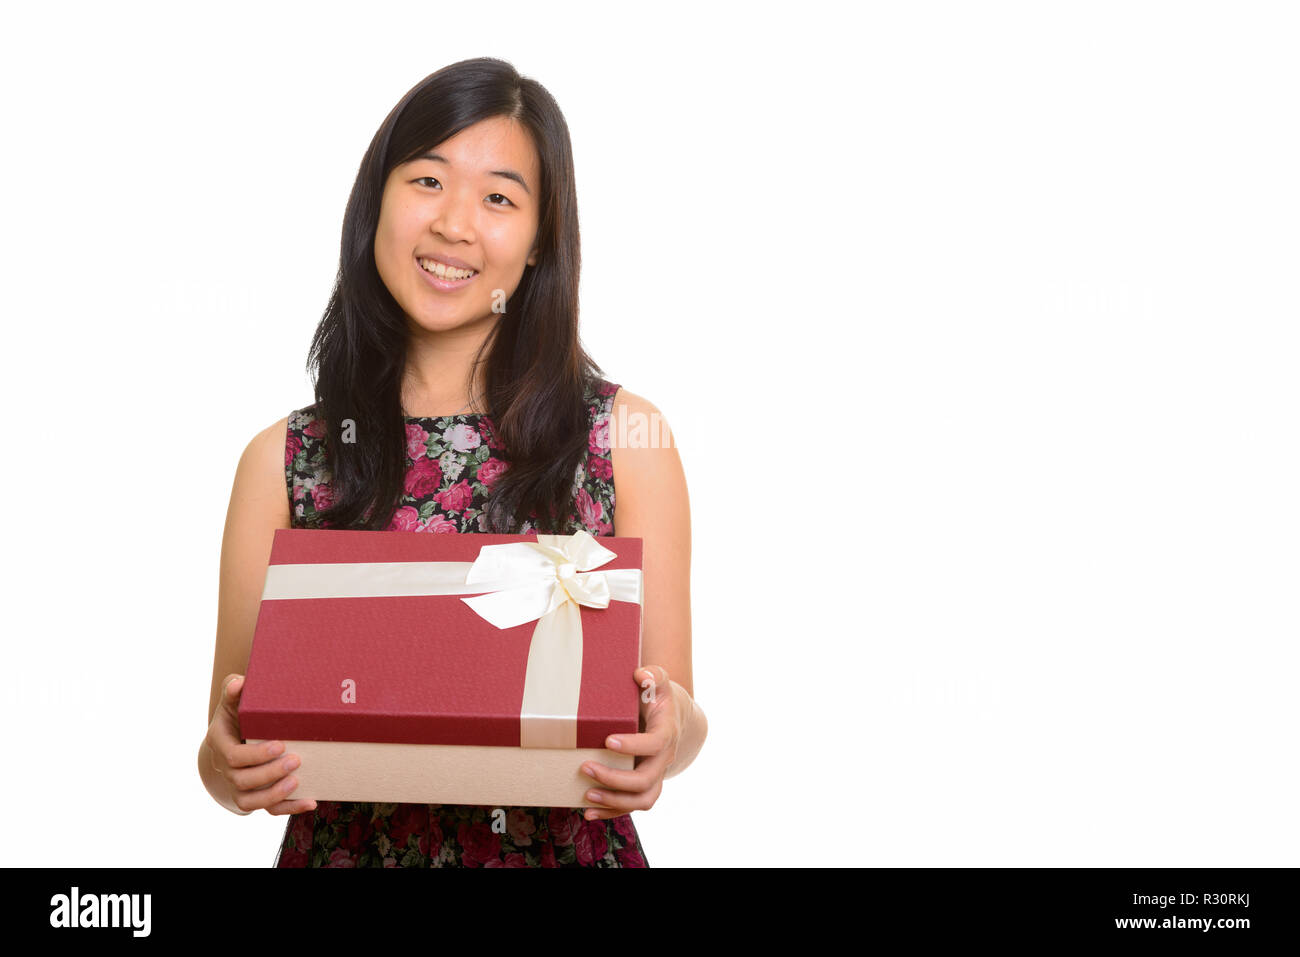 Young happy Asian woman holding gift box Stock Photo